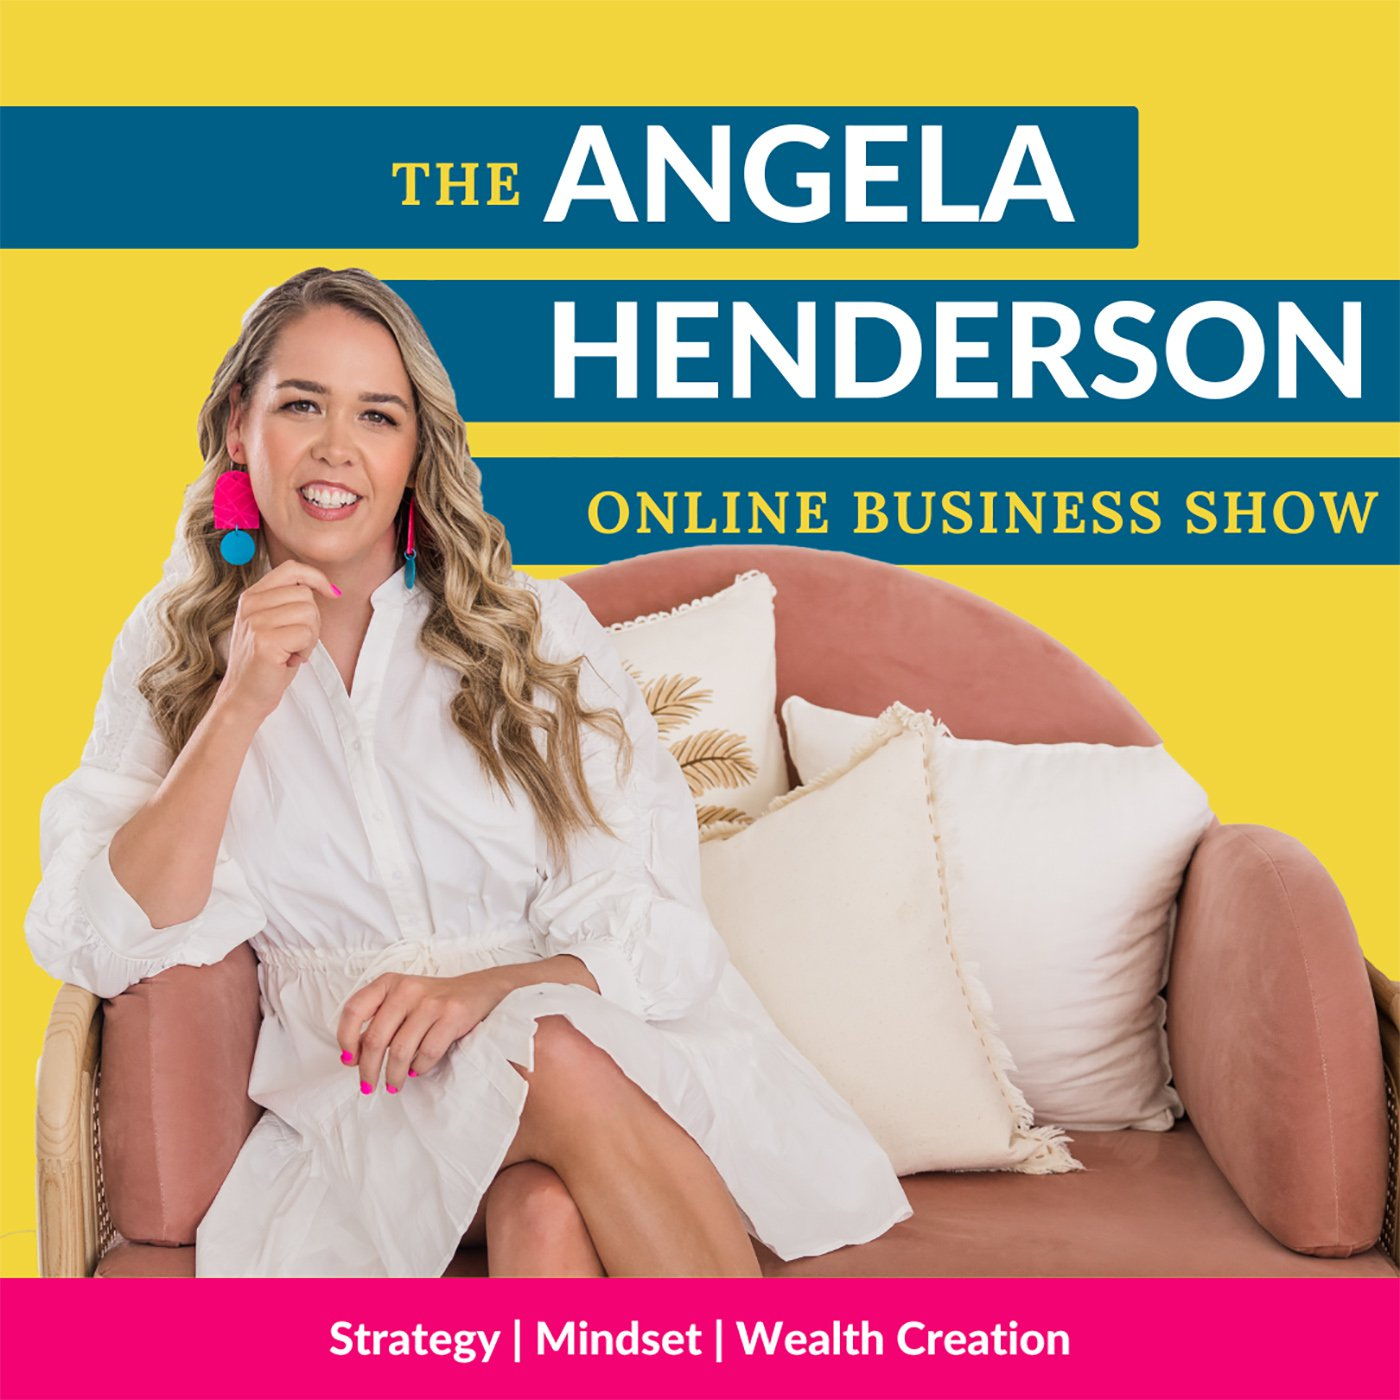 The Power of Focus: Why You Don't Need More Offers with Angela Henderson